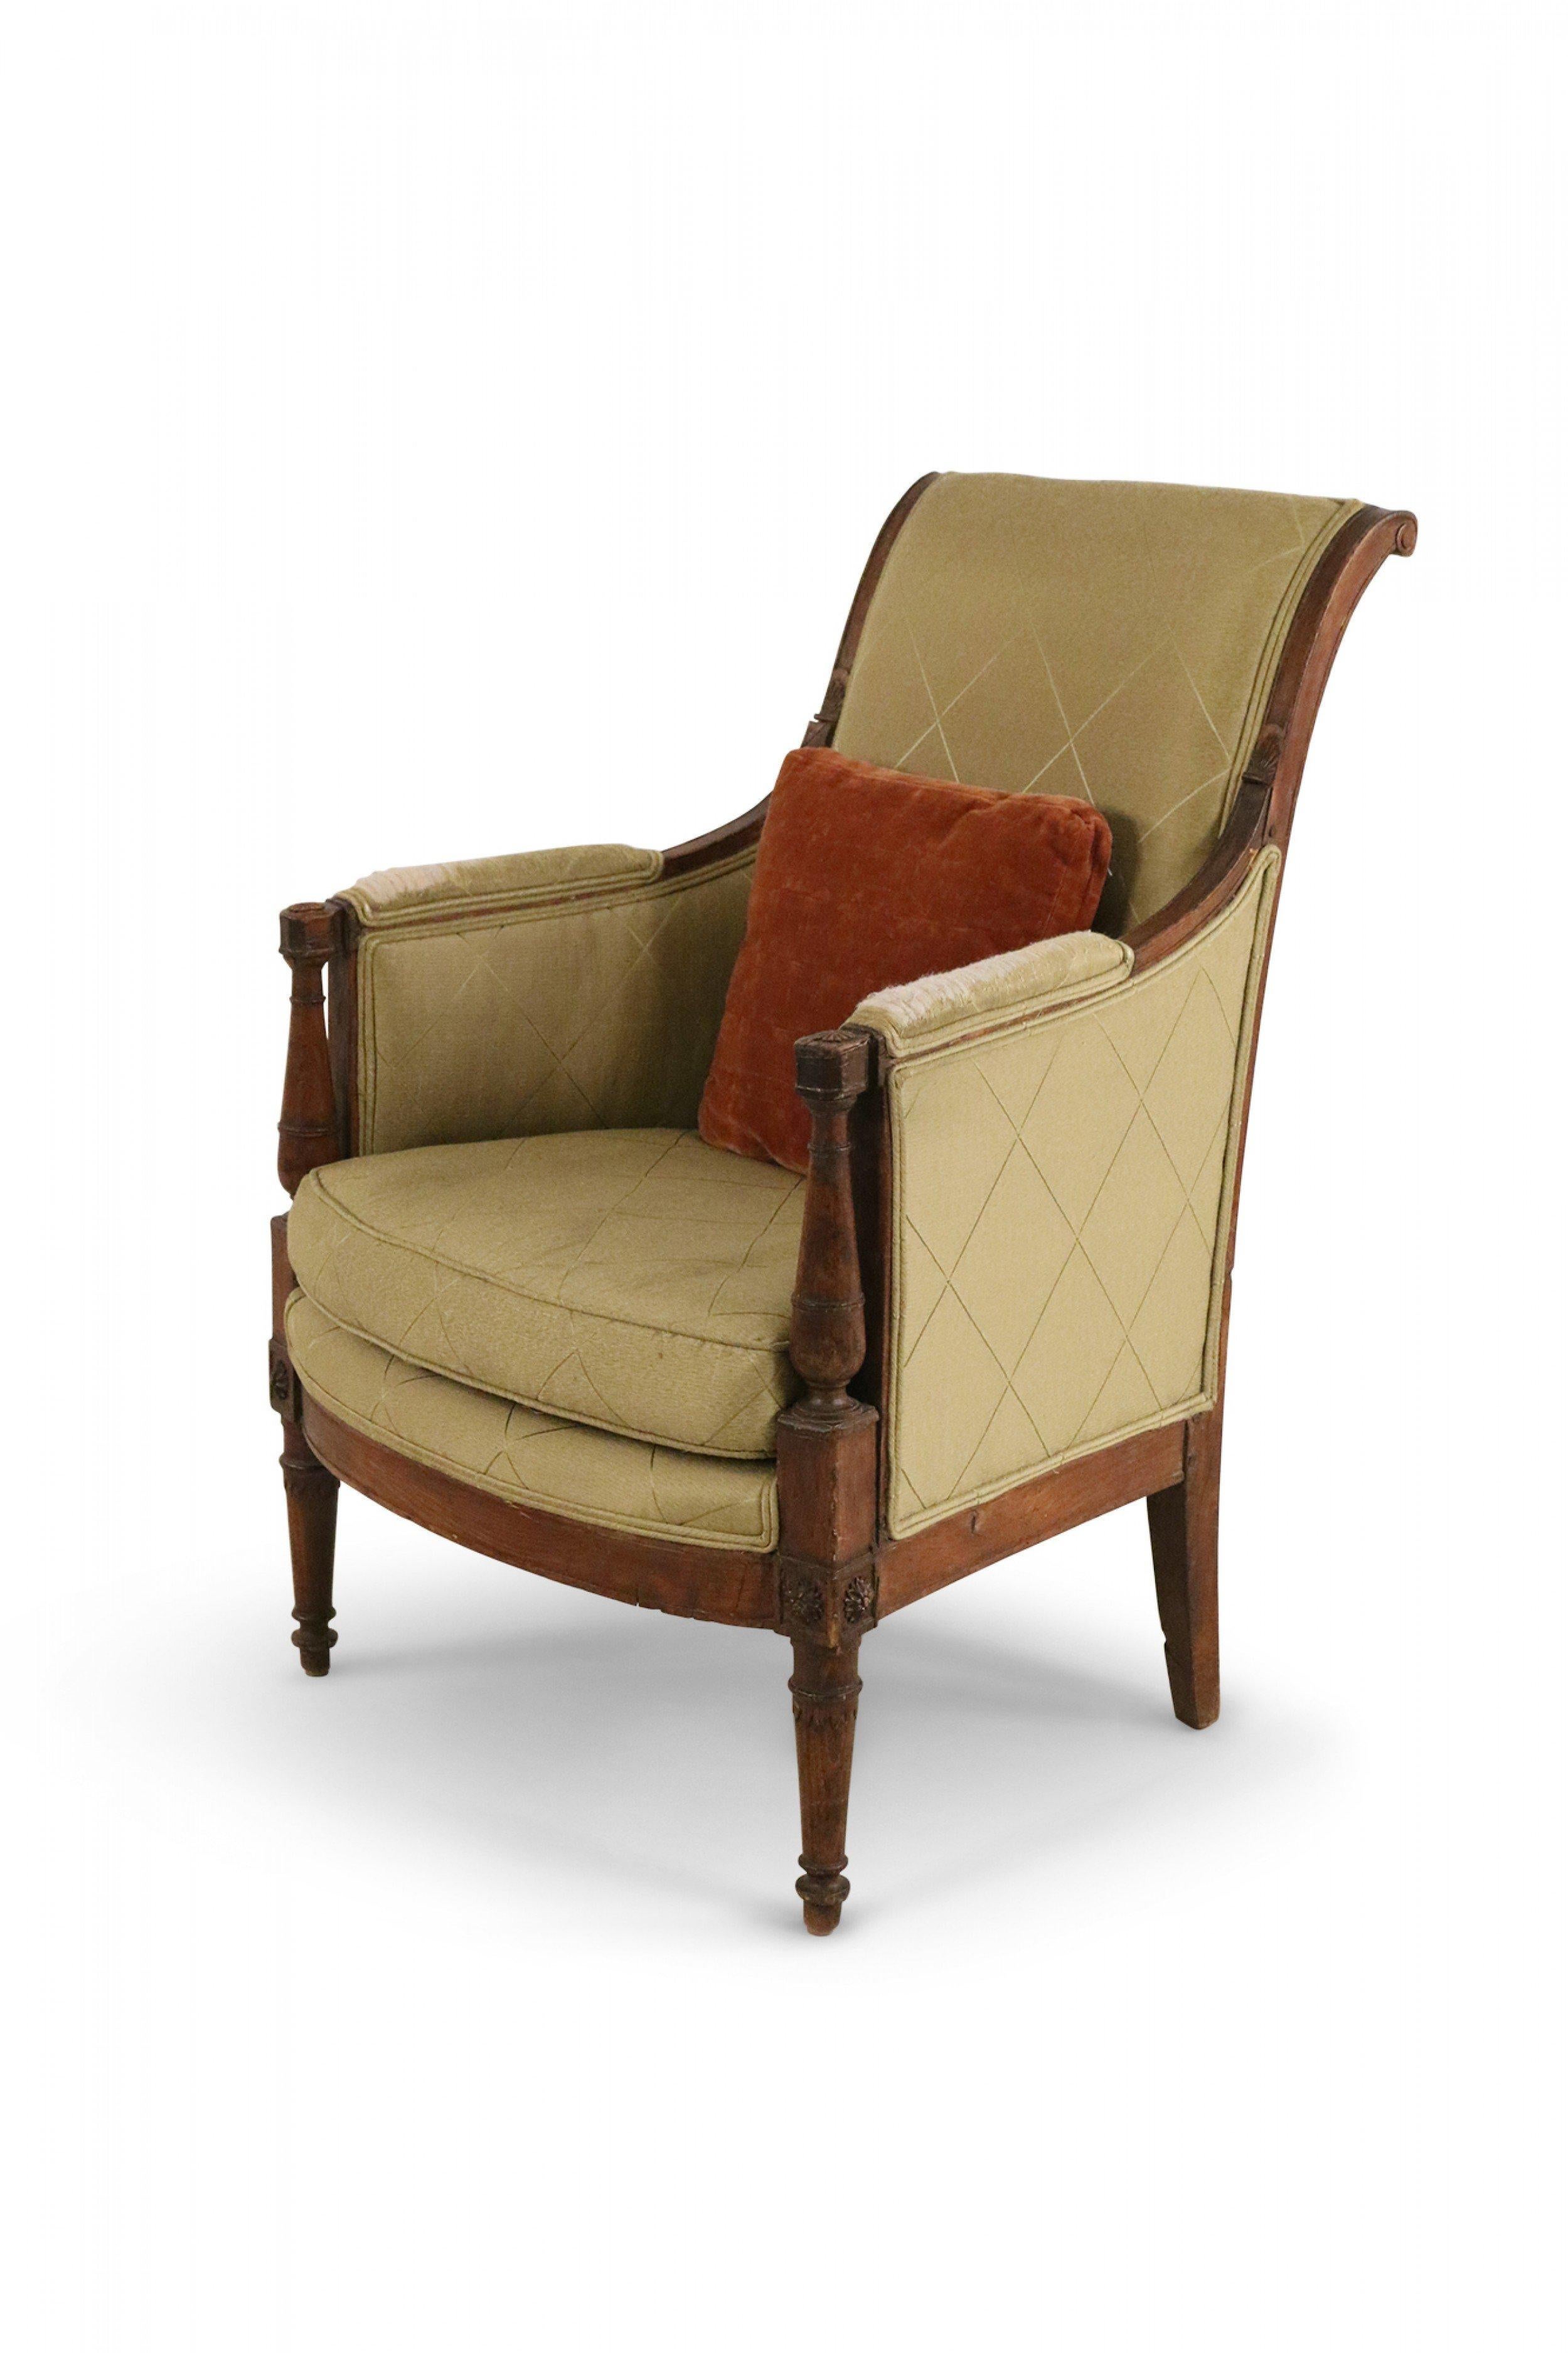 French Directoire Green Diamond Pattern Upholstered Mahogany Bergere Armchair For Sale 3